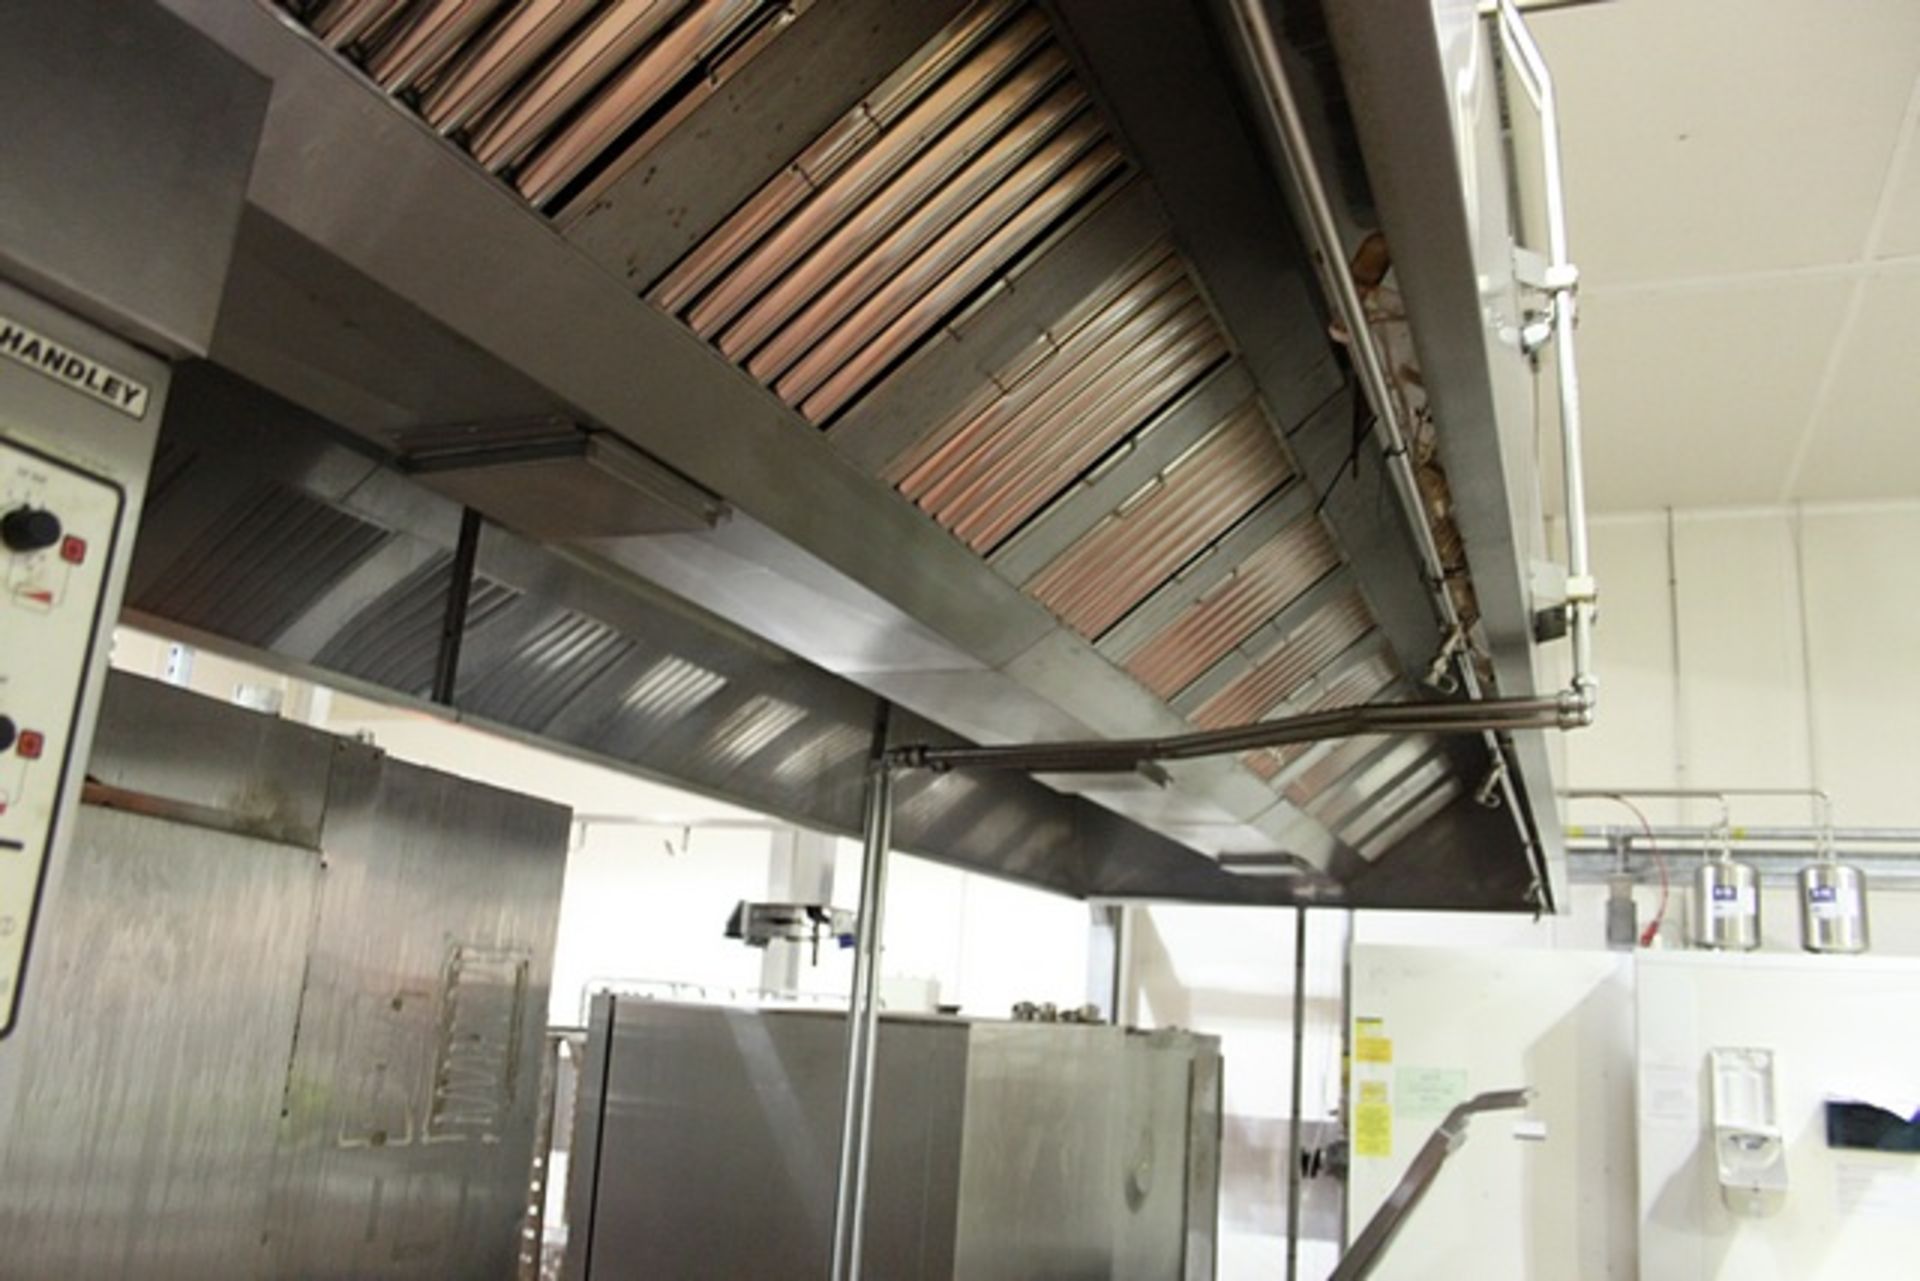 Canopy UK stainless steel commercial kitchen canopy high quality 1 mm thick 430 grade stainless - Image 4 of 4